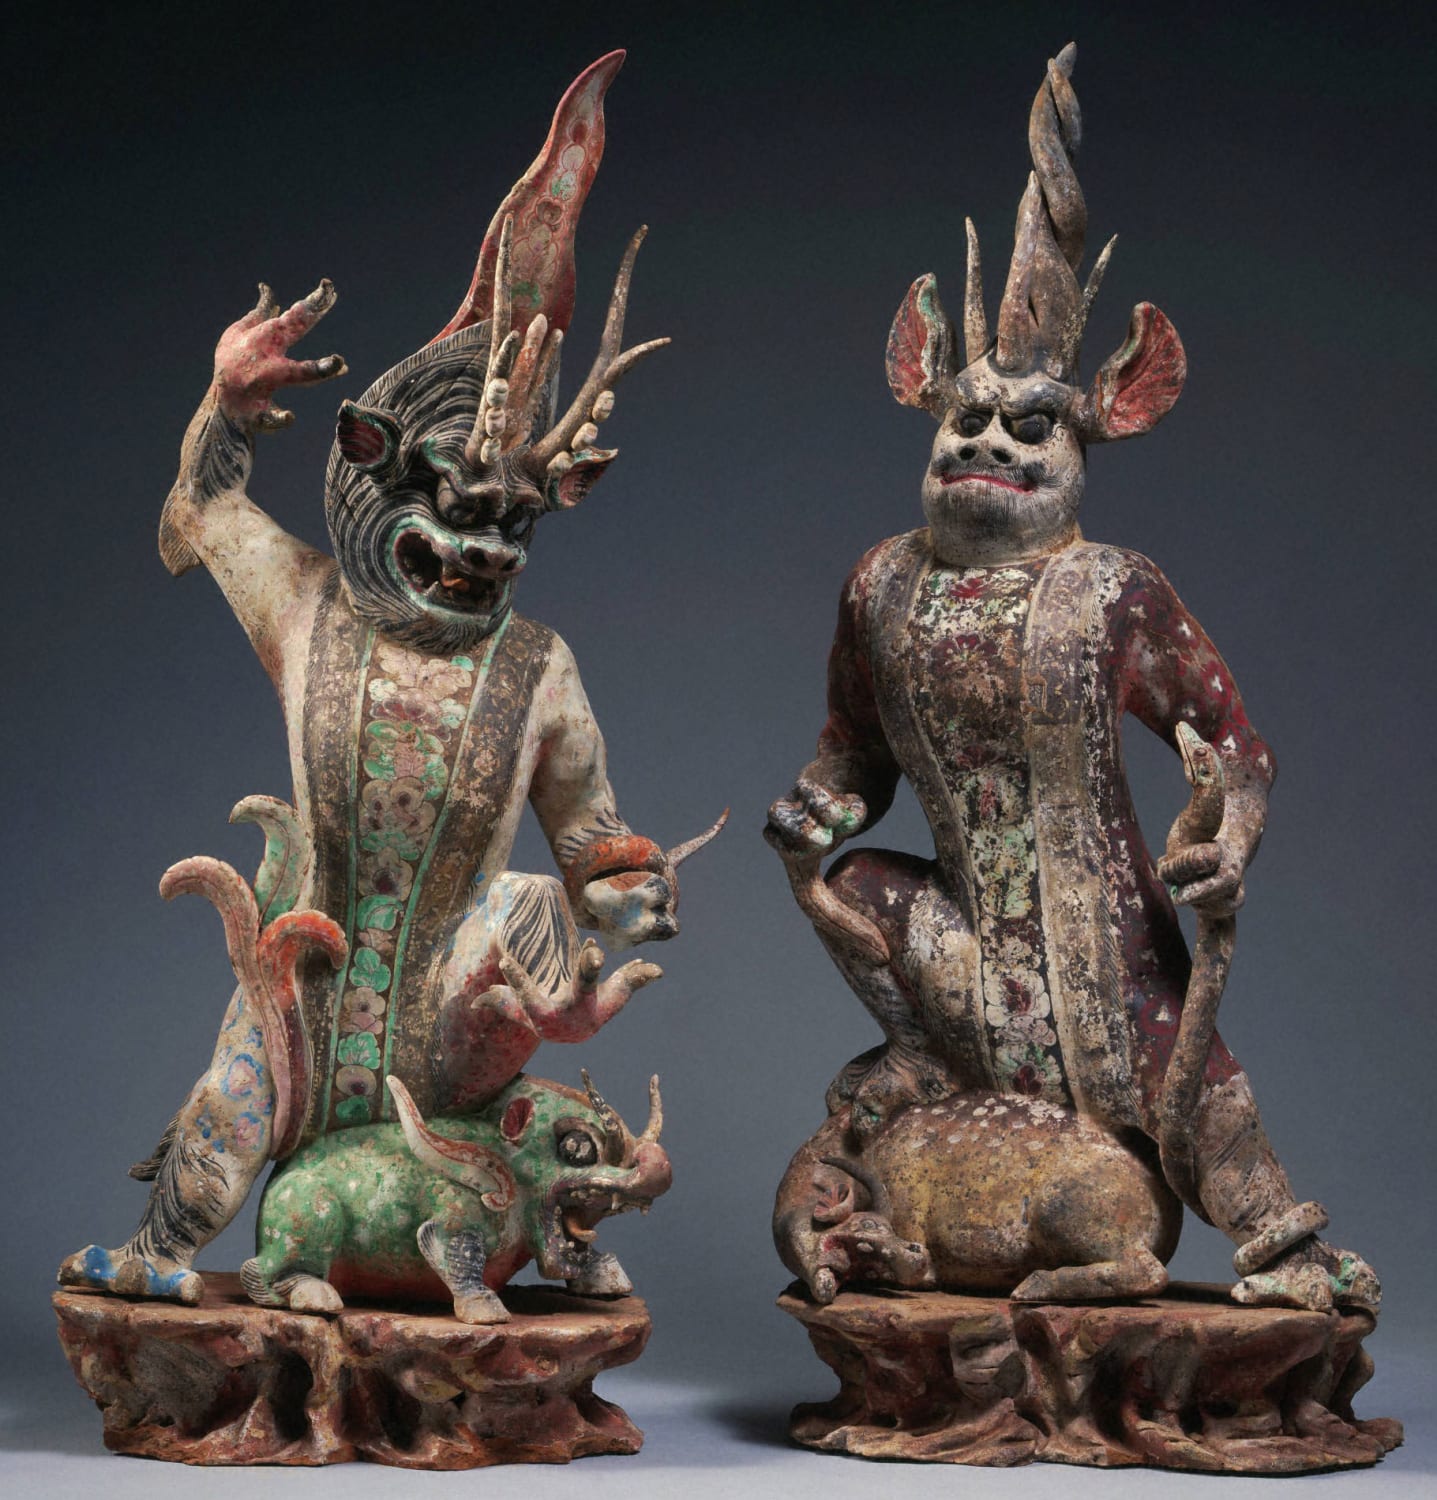 Two ceramic tomb guardians holding snakes. China, Tang dynasty, 8th century AD